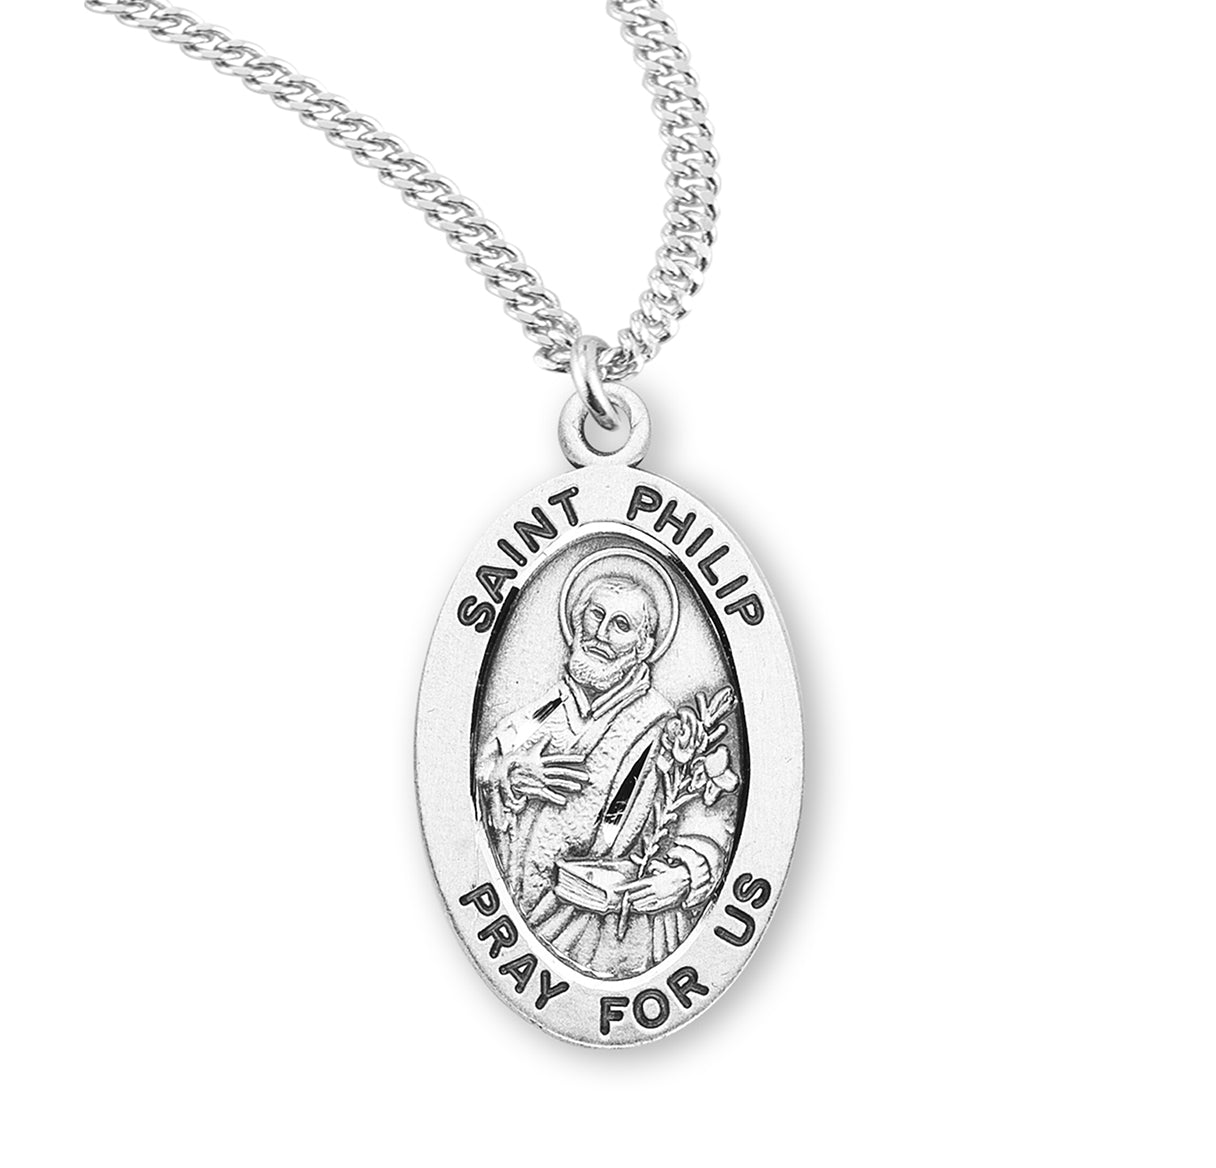 Patron Saint Philip Oval Sterling Silver Medal